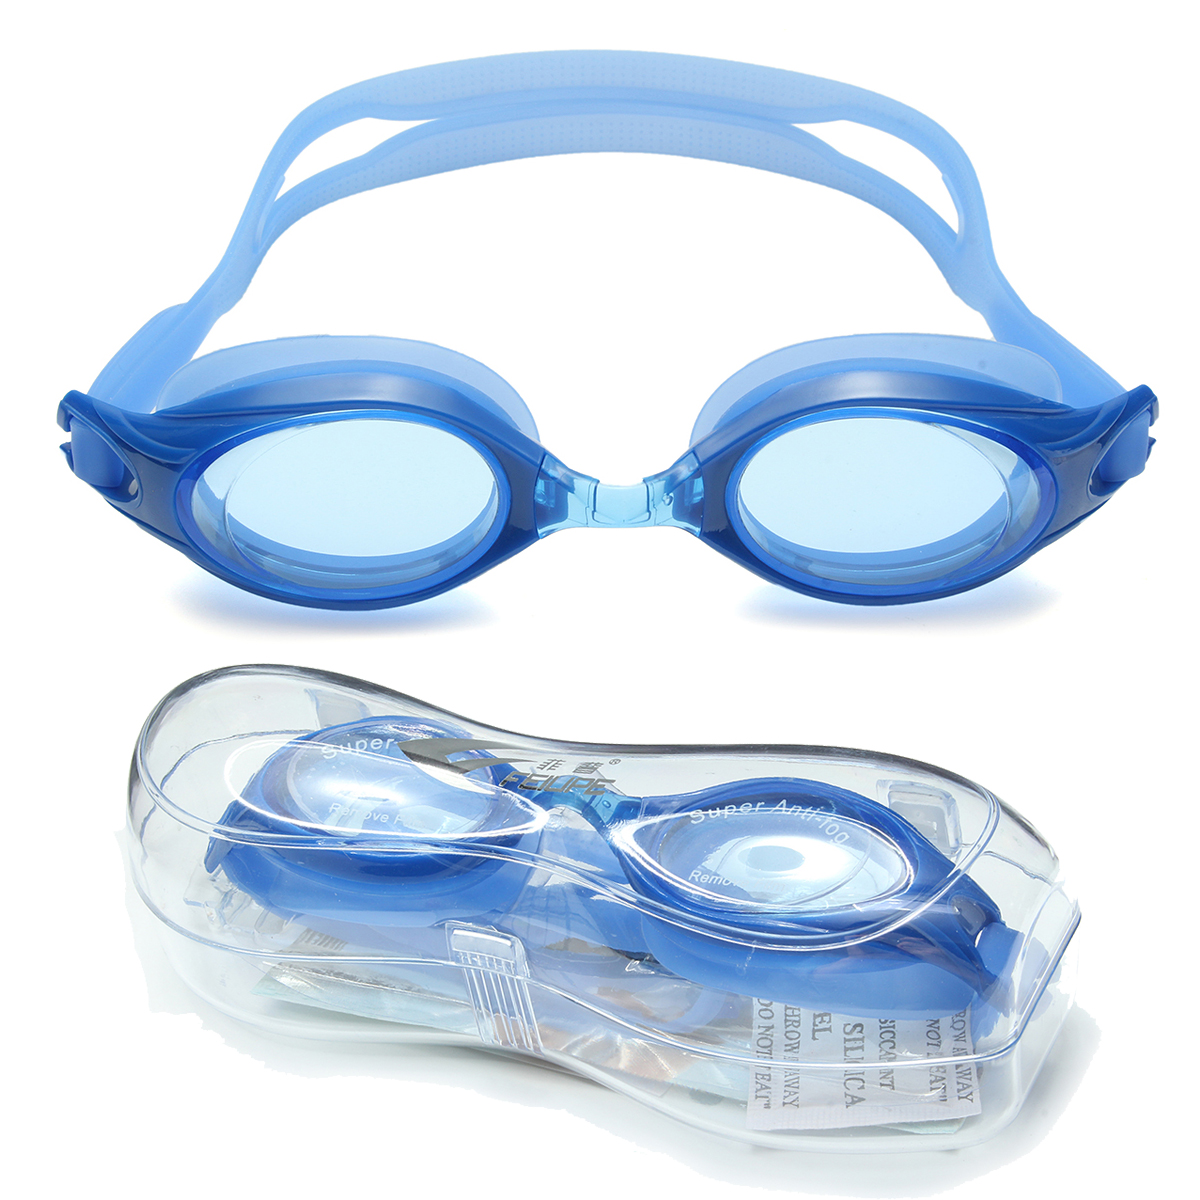 OUTEROO-Swimming-Glasses-PC-Silicone-Shockproof-Anti-fog-Anti-UV-Adjustable-Swimming-Goggles-for-Adu-1886066-16